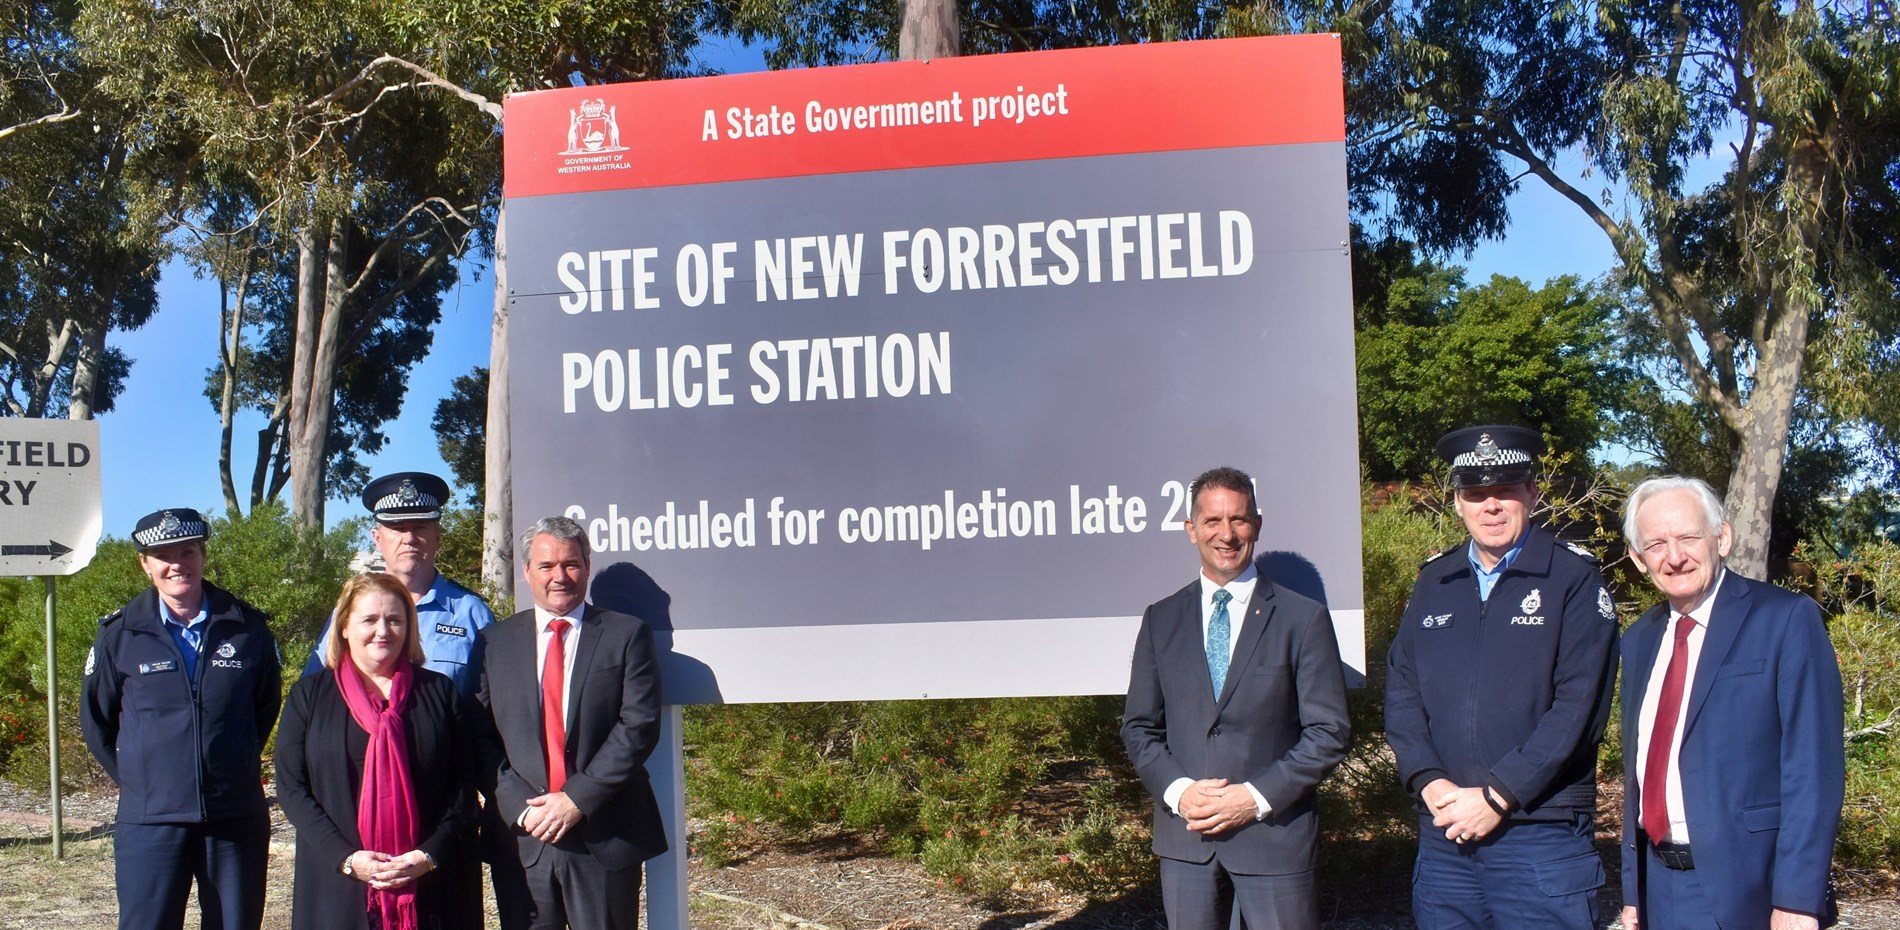 New Forrestfield Police Station Main Image